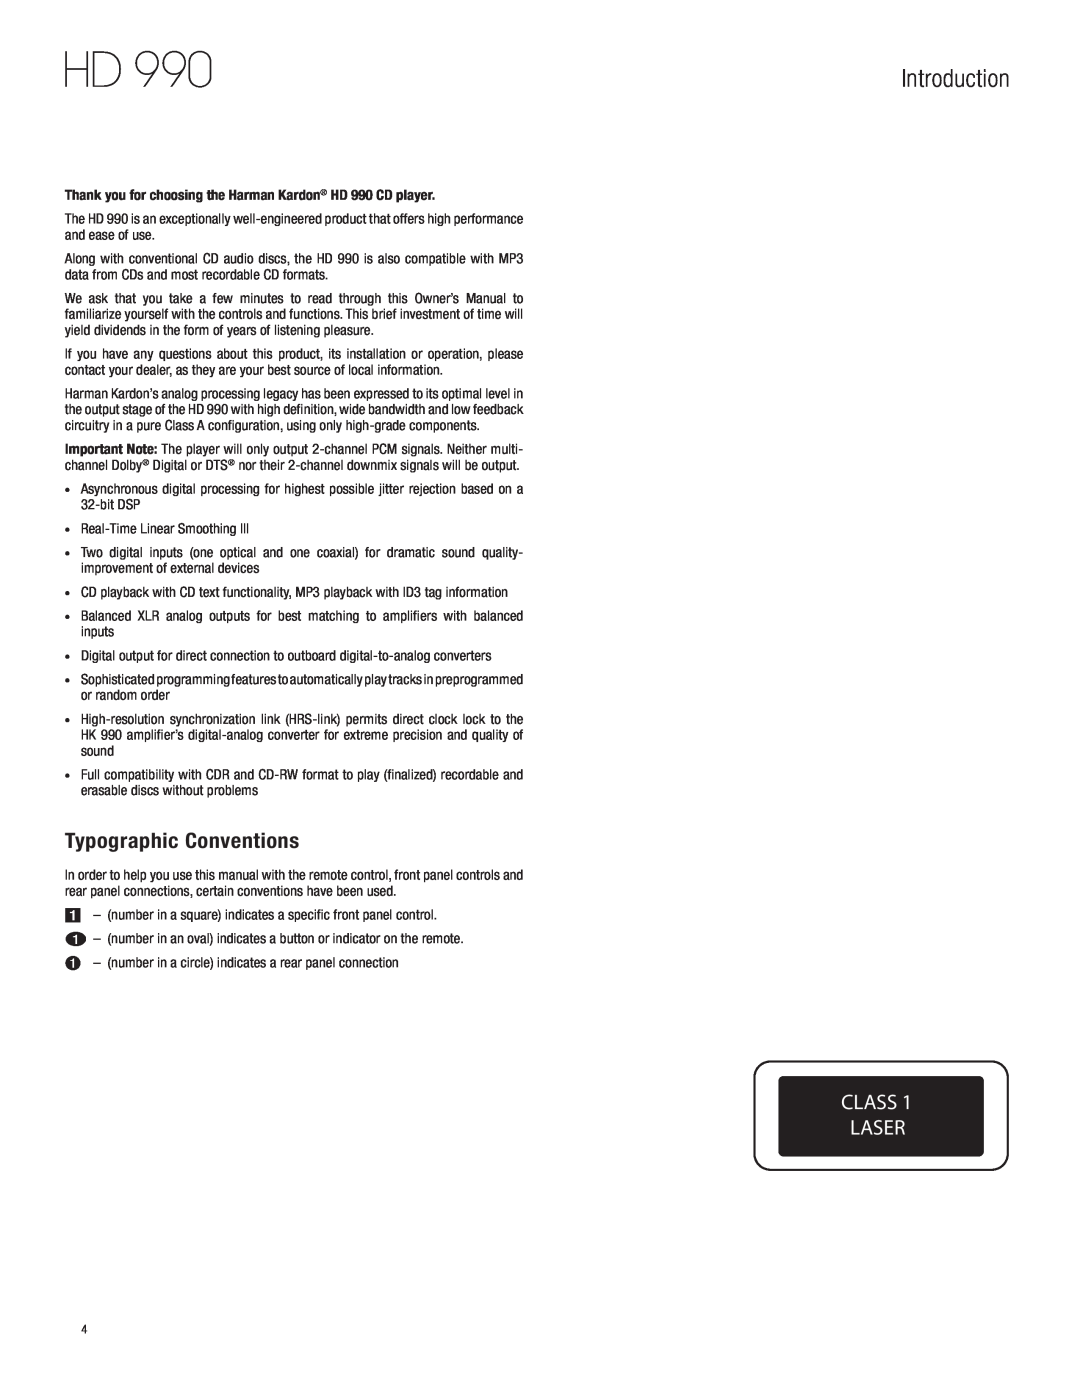 Harman-Kardon HD 990 owner manual Introduction, Typographic Conventions, Class Laser 